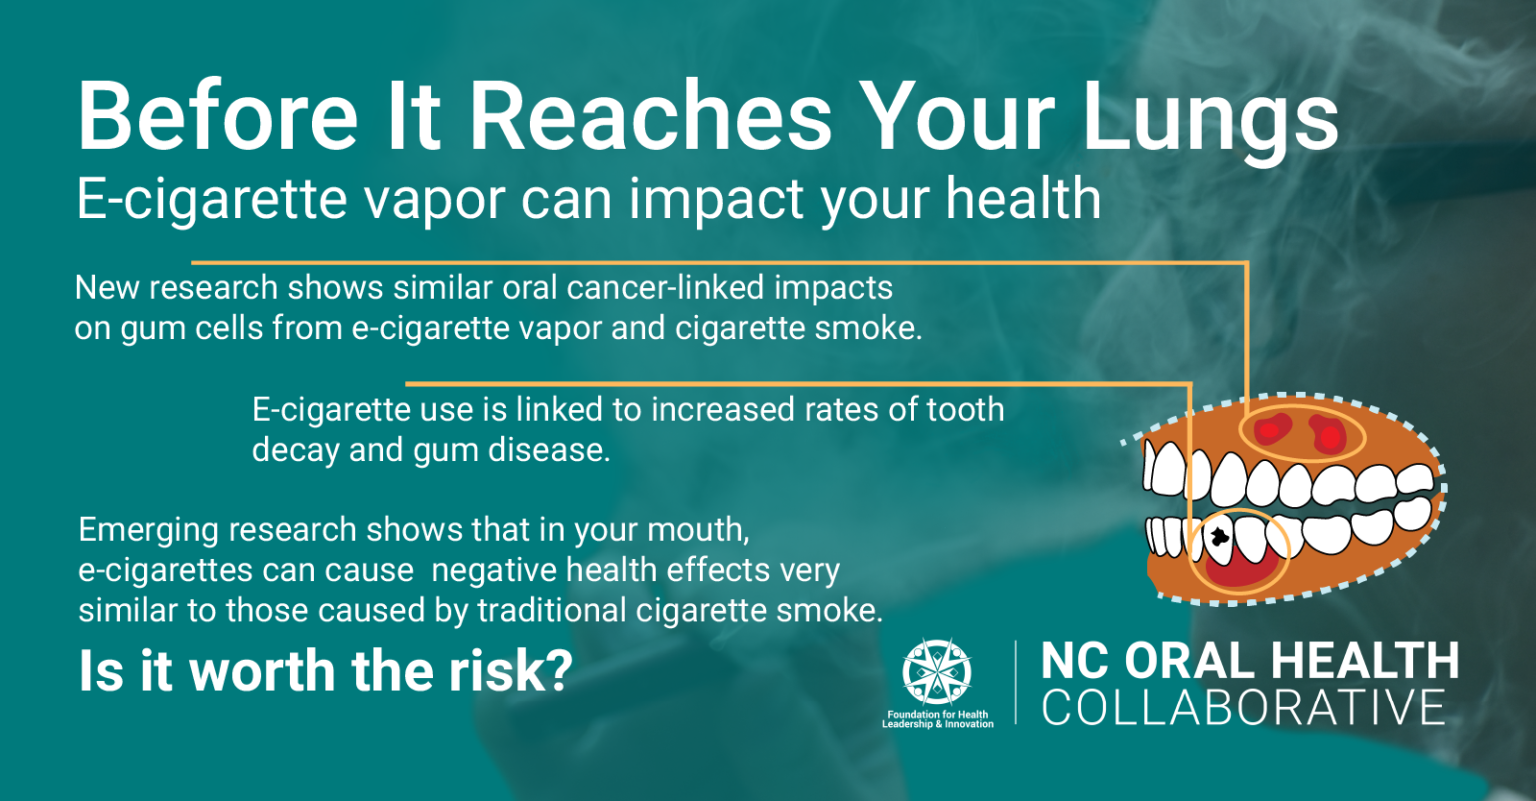 Should I Be Worried About Vaping North Carolina Oral Health Collaborative